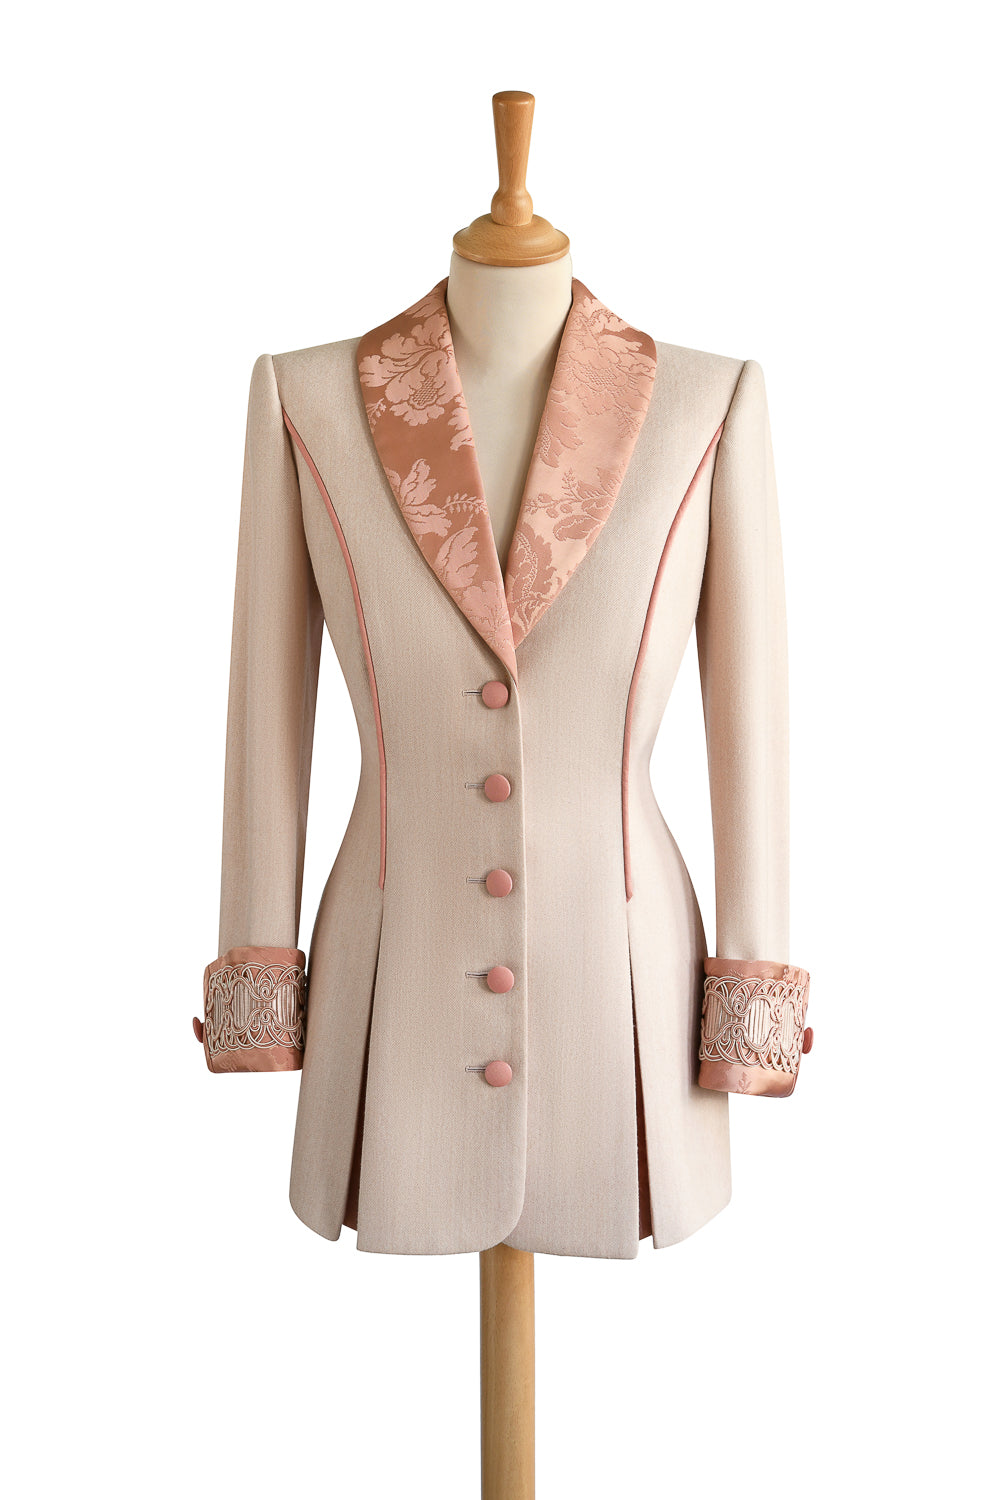 Gainsborough No.1 Long Jacket in Pale Pink front view